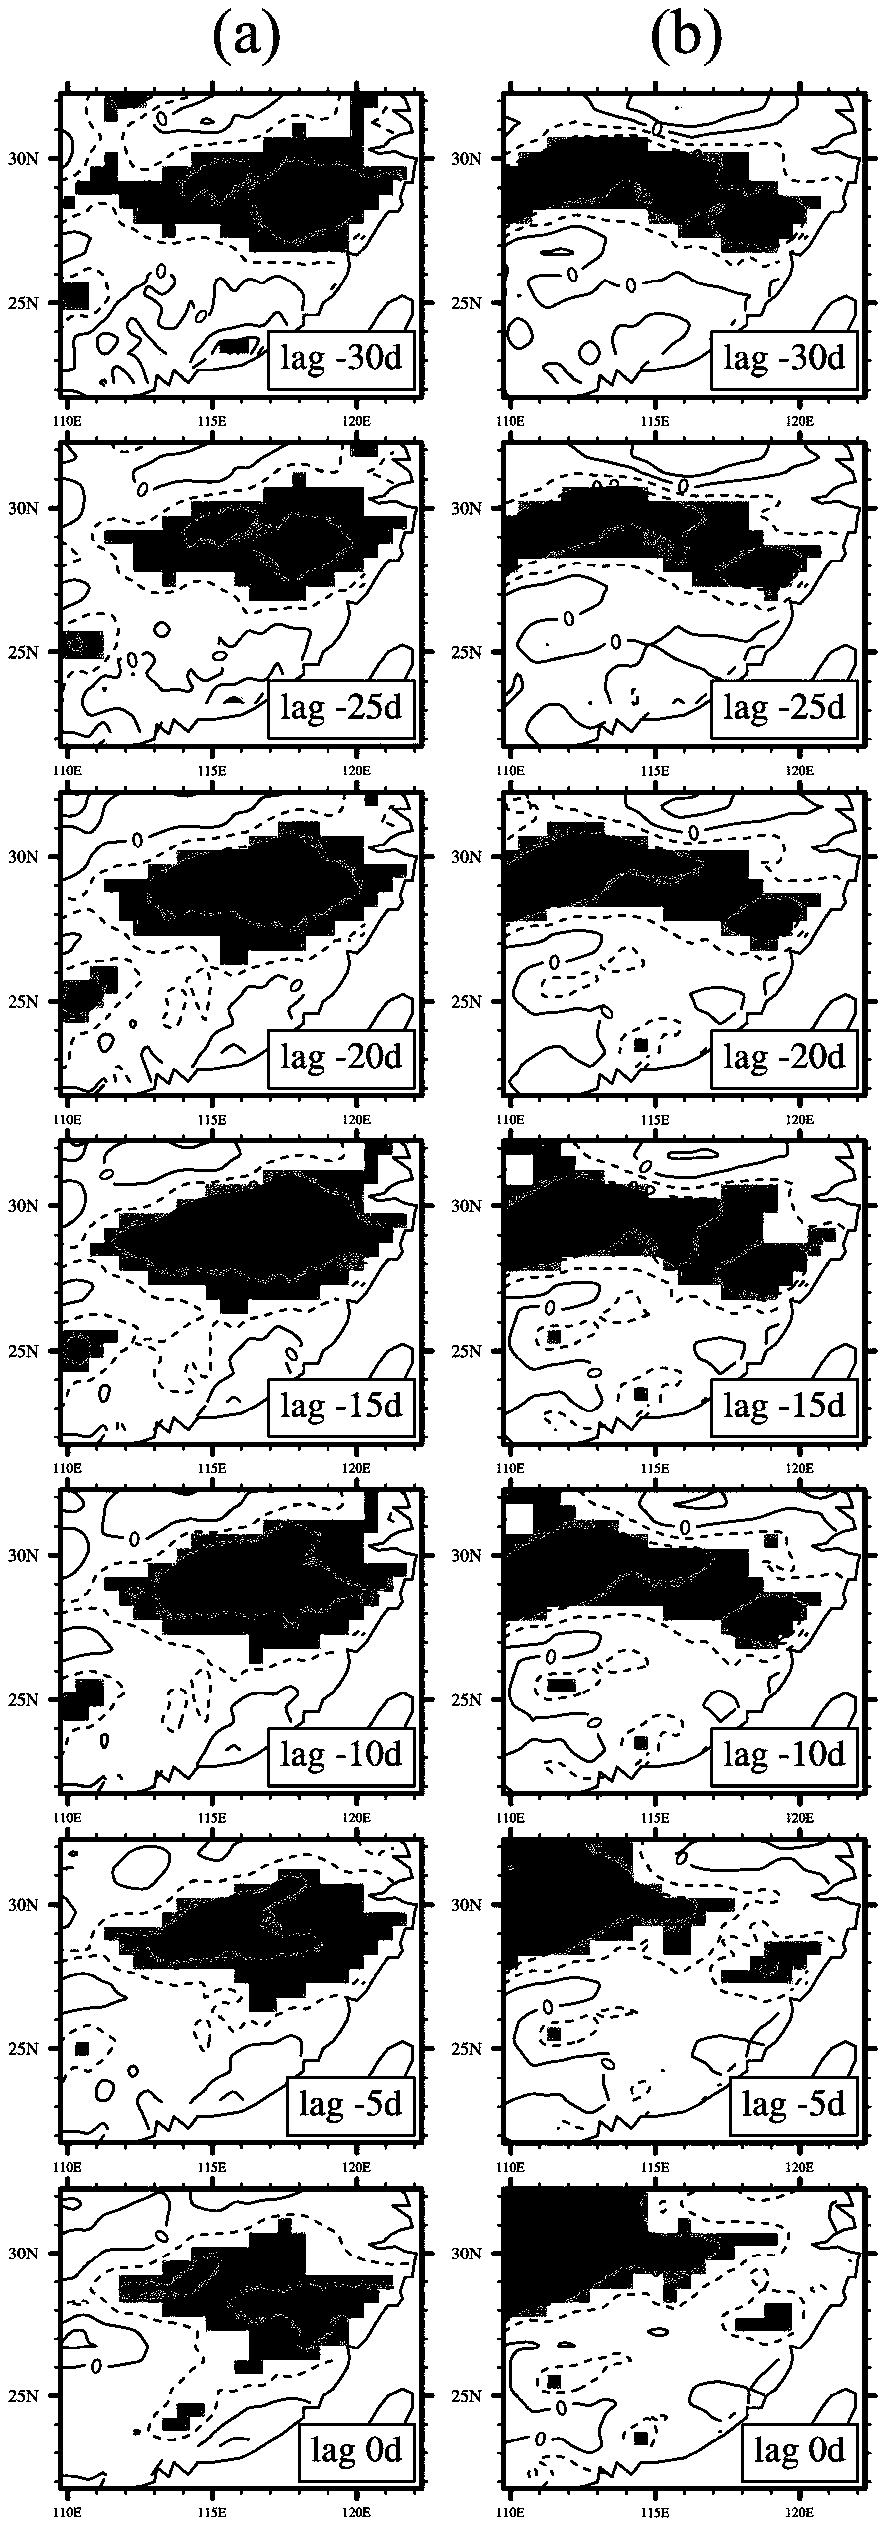 Extended period prediction method considering large-scale circulation background field